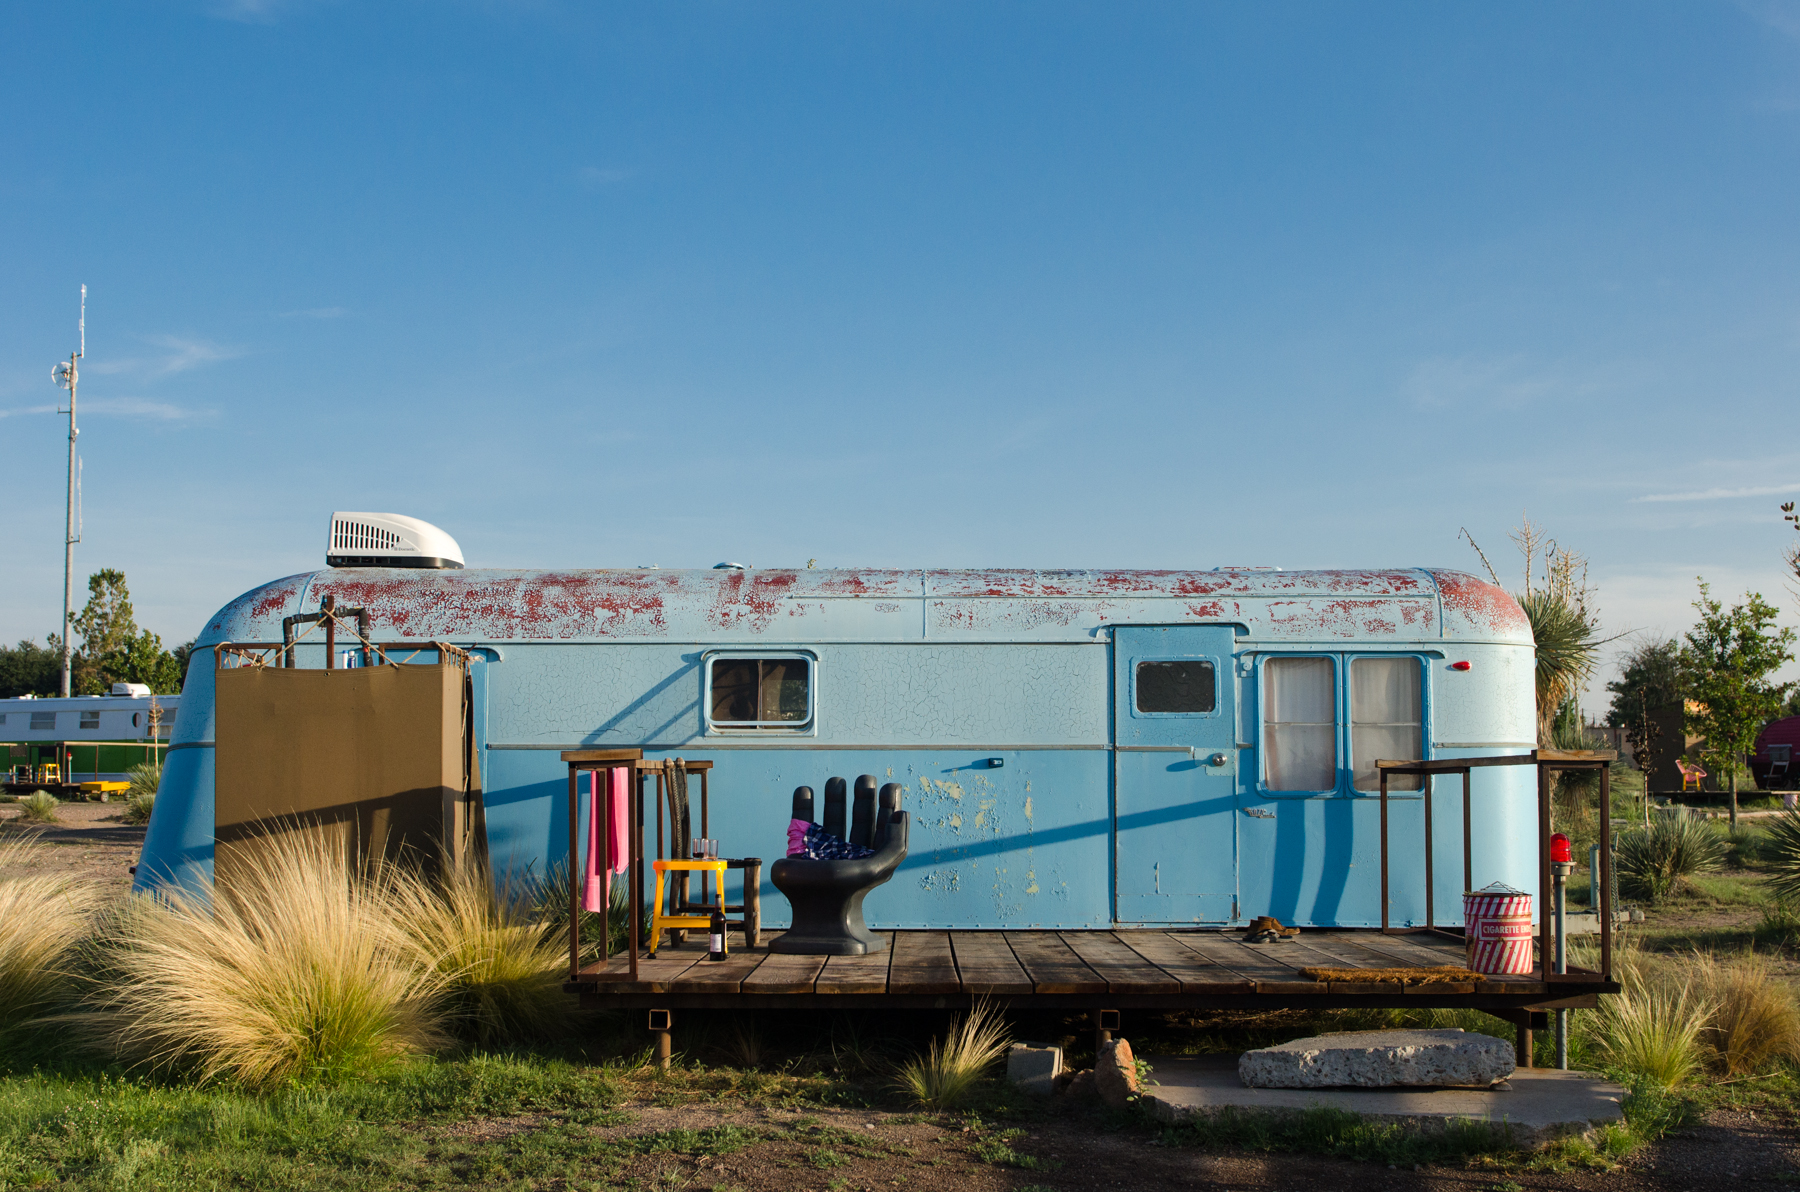 El Cosmico is definitely the coolest place to stay in Marfa: it has arty trailers, yurts, tee pees and lots of shady hammocks and live bands on the weekends.